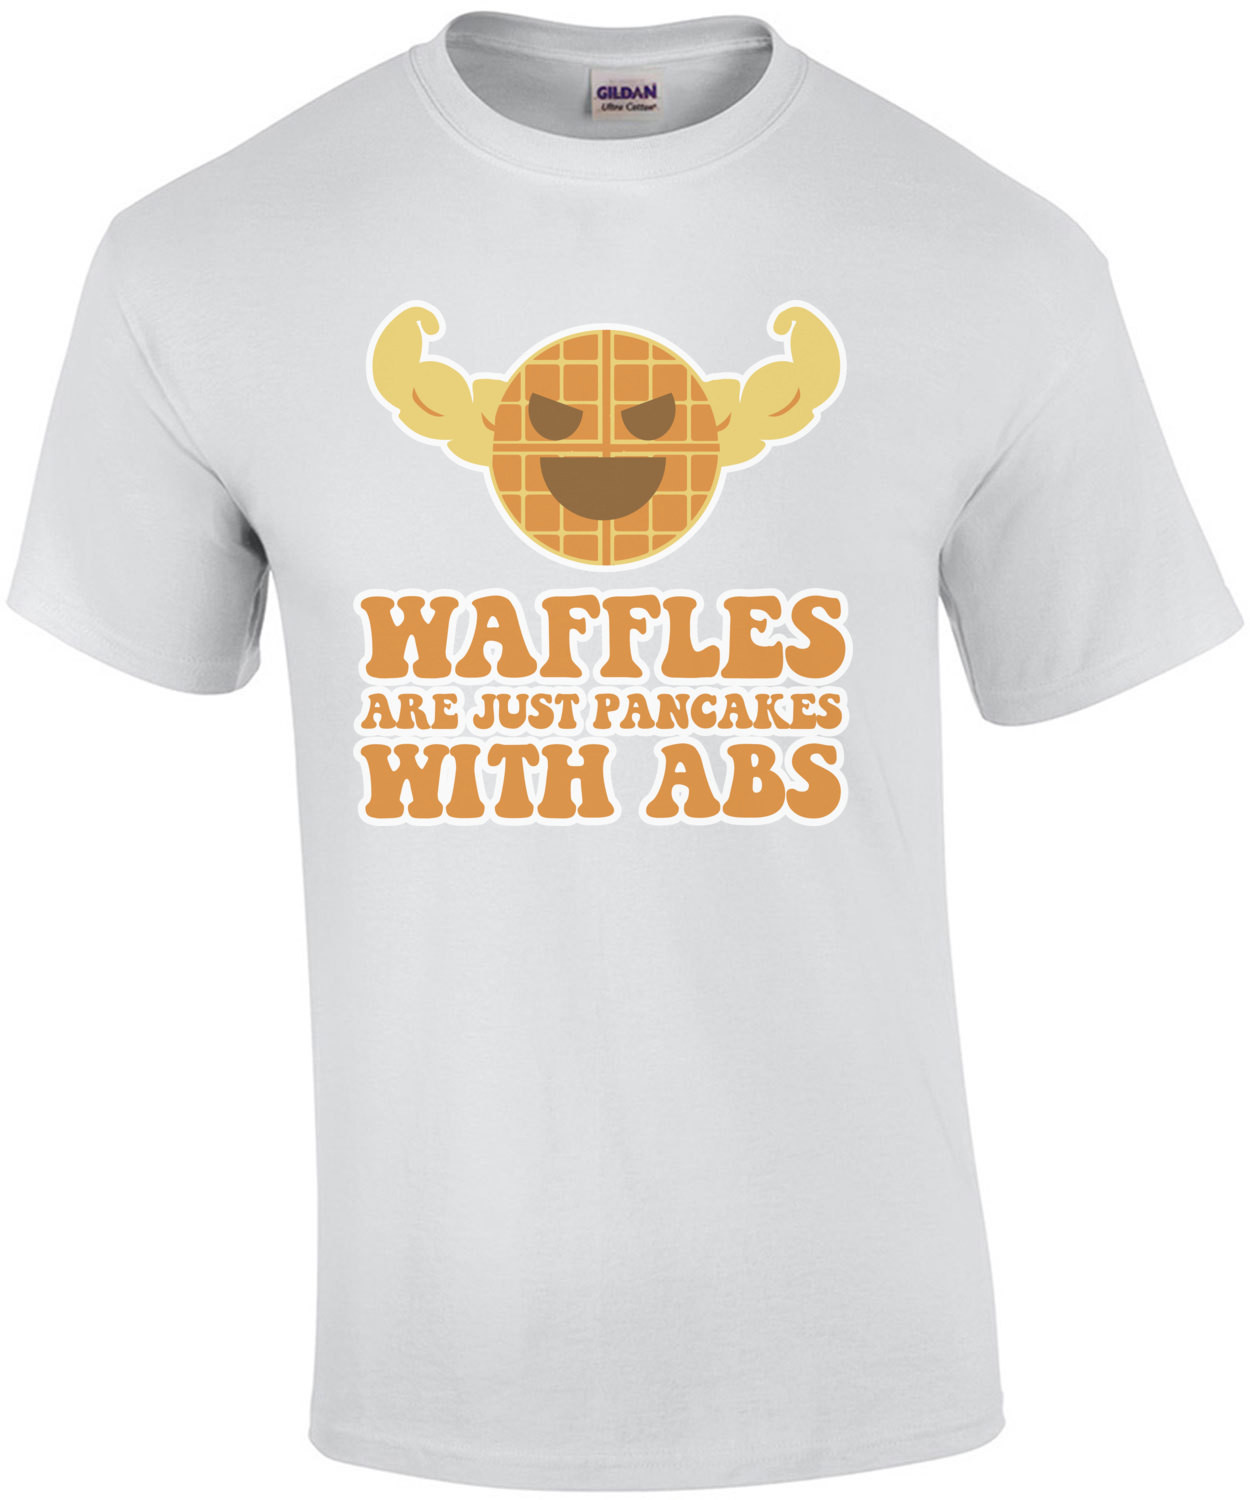 Waffles are just pancakes with abs t-shirt